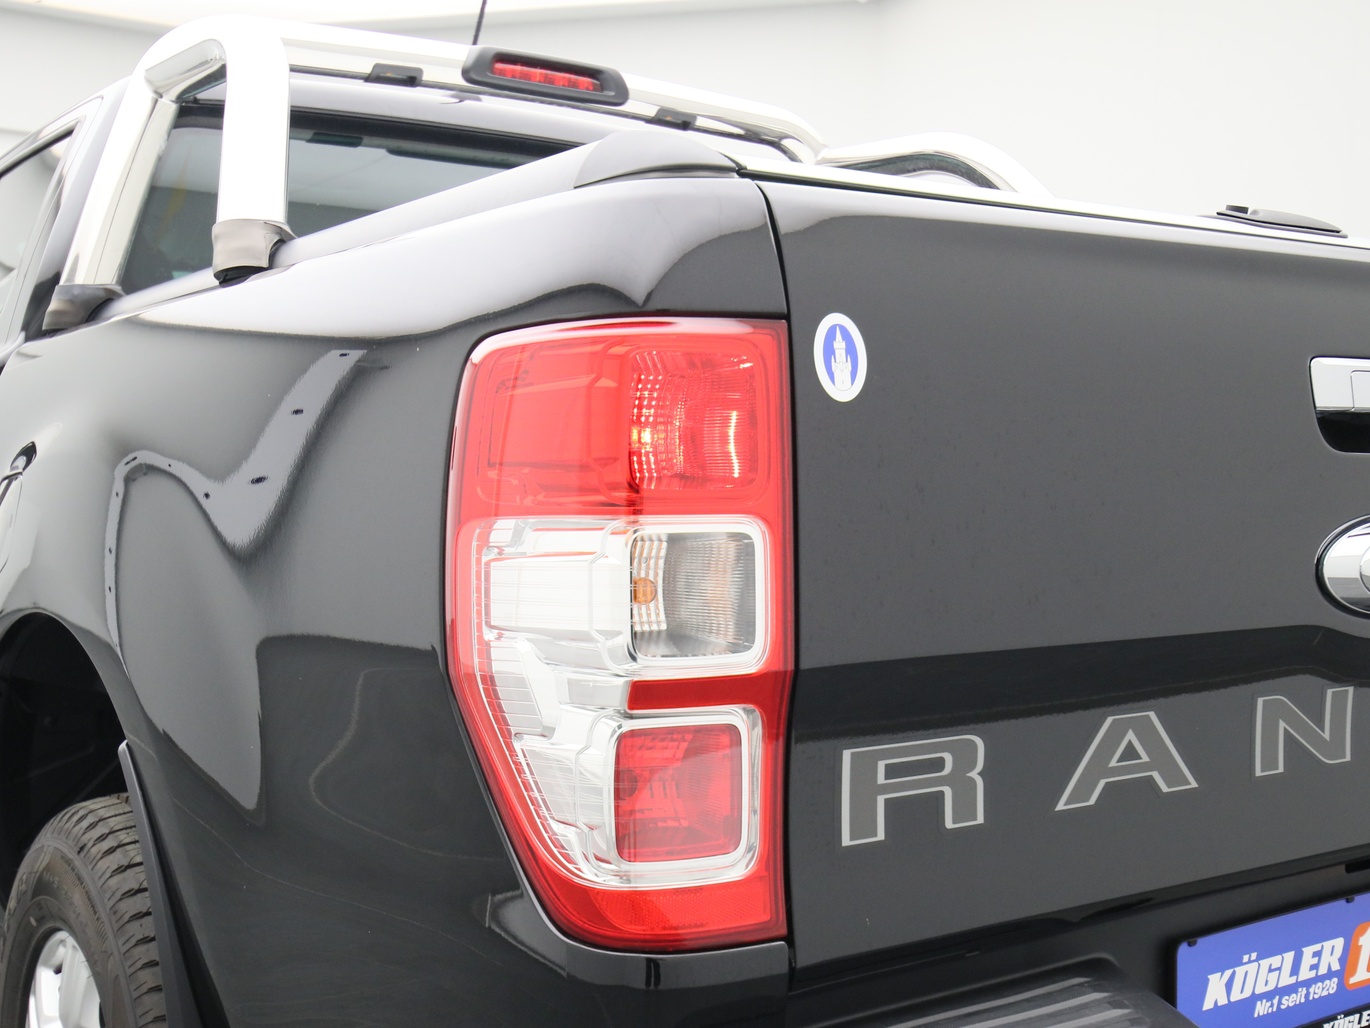  Ford Ranger DoKa Limited 213PS / AHK / PDC / Rollo in Agate Black 